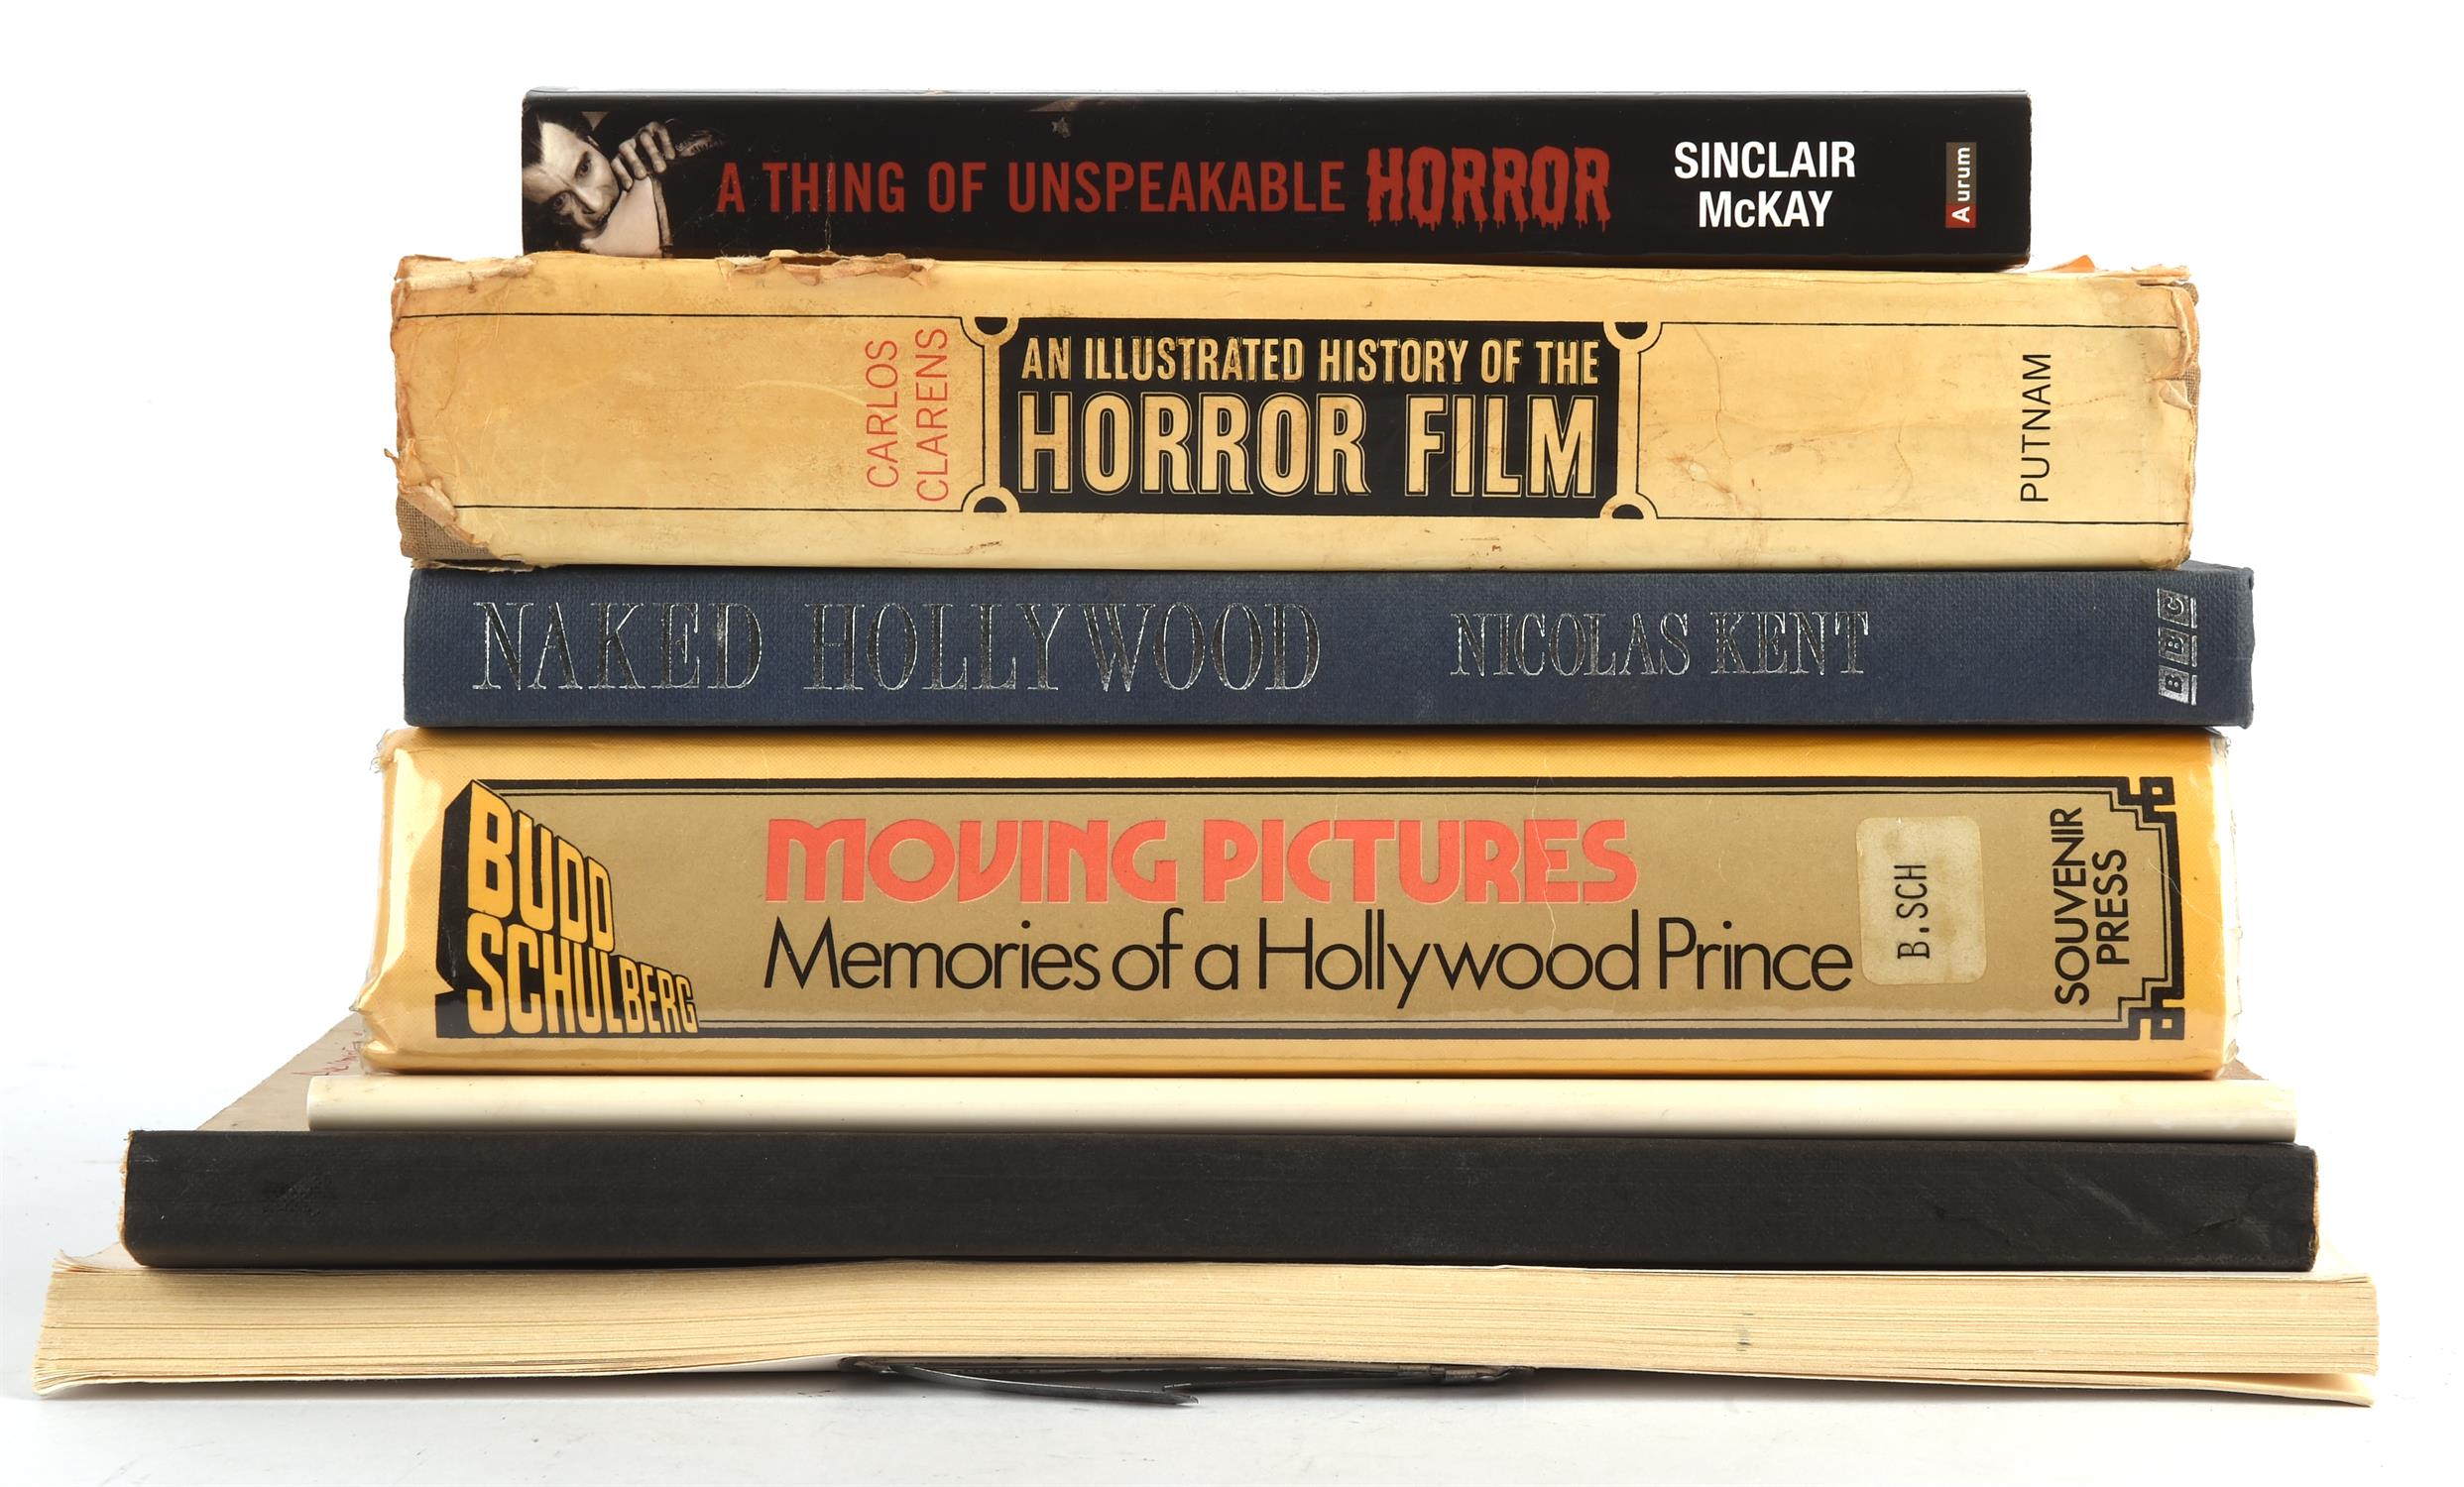 Horror and Hollywood: Scripts, Screenplay, and related books – Dr. Jekyll & Mr.